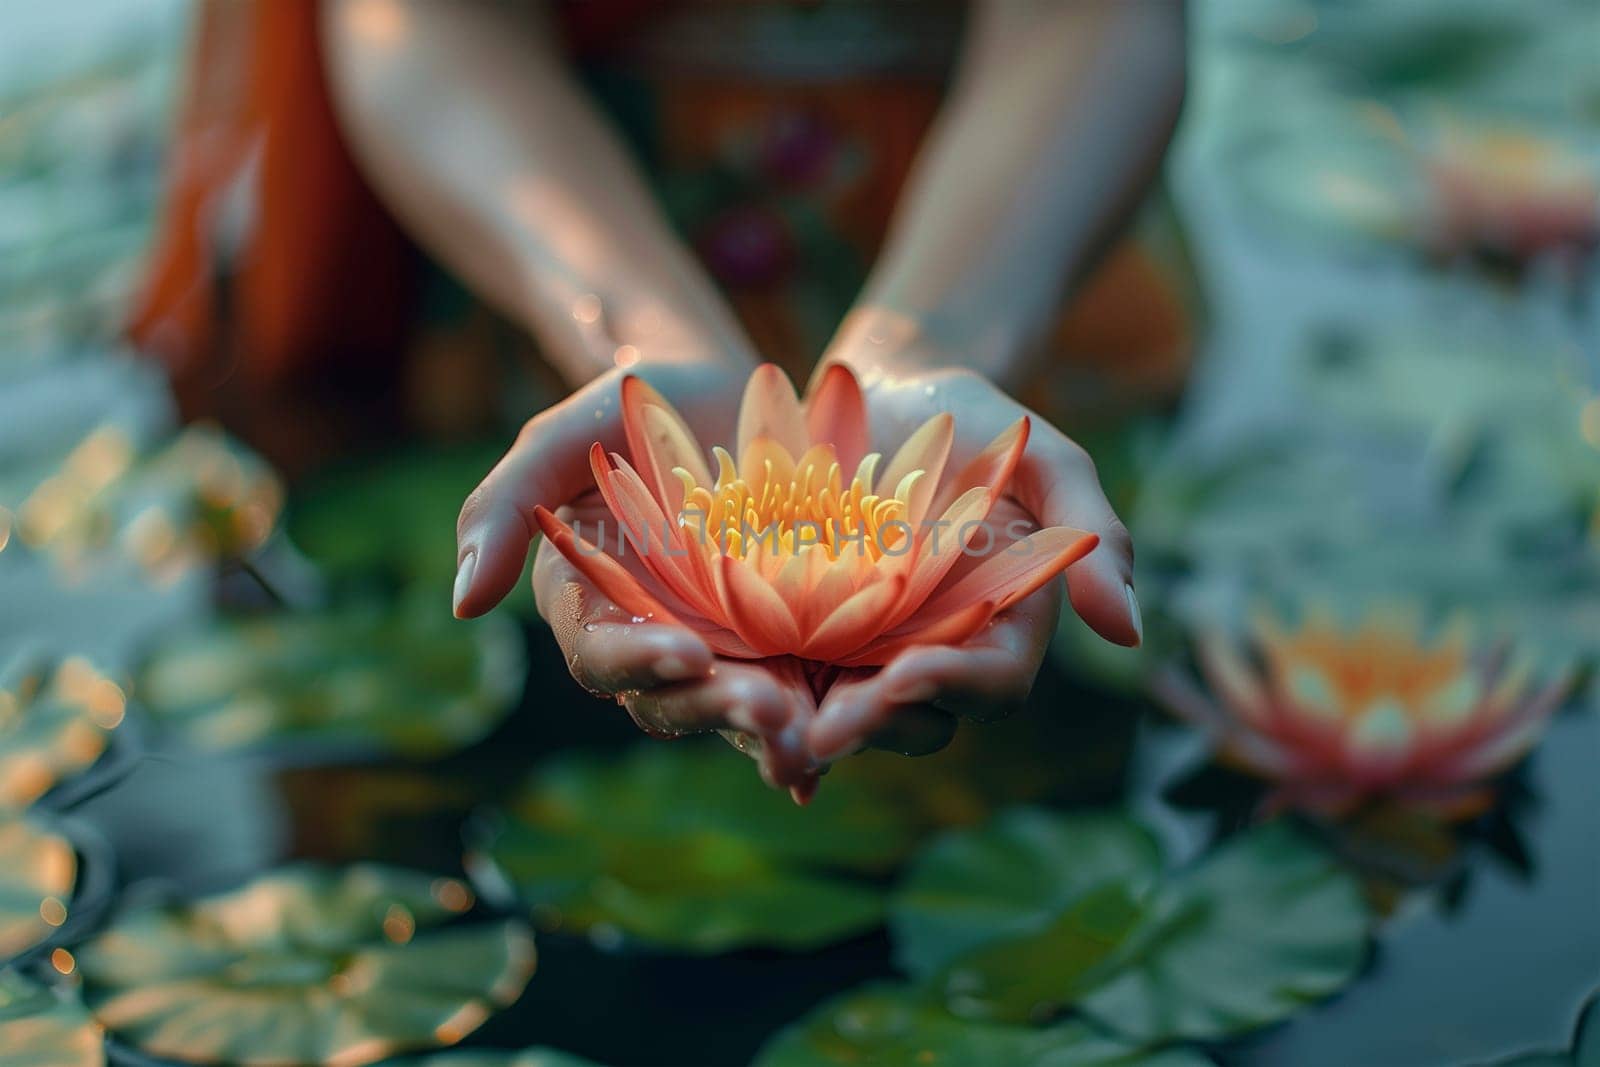 Person Holding Water Lily in Hands by Sd28DimoN_1976